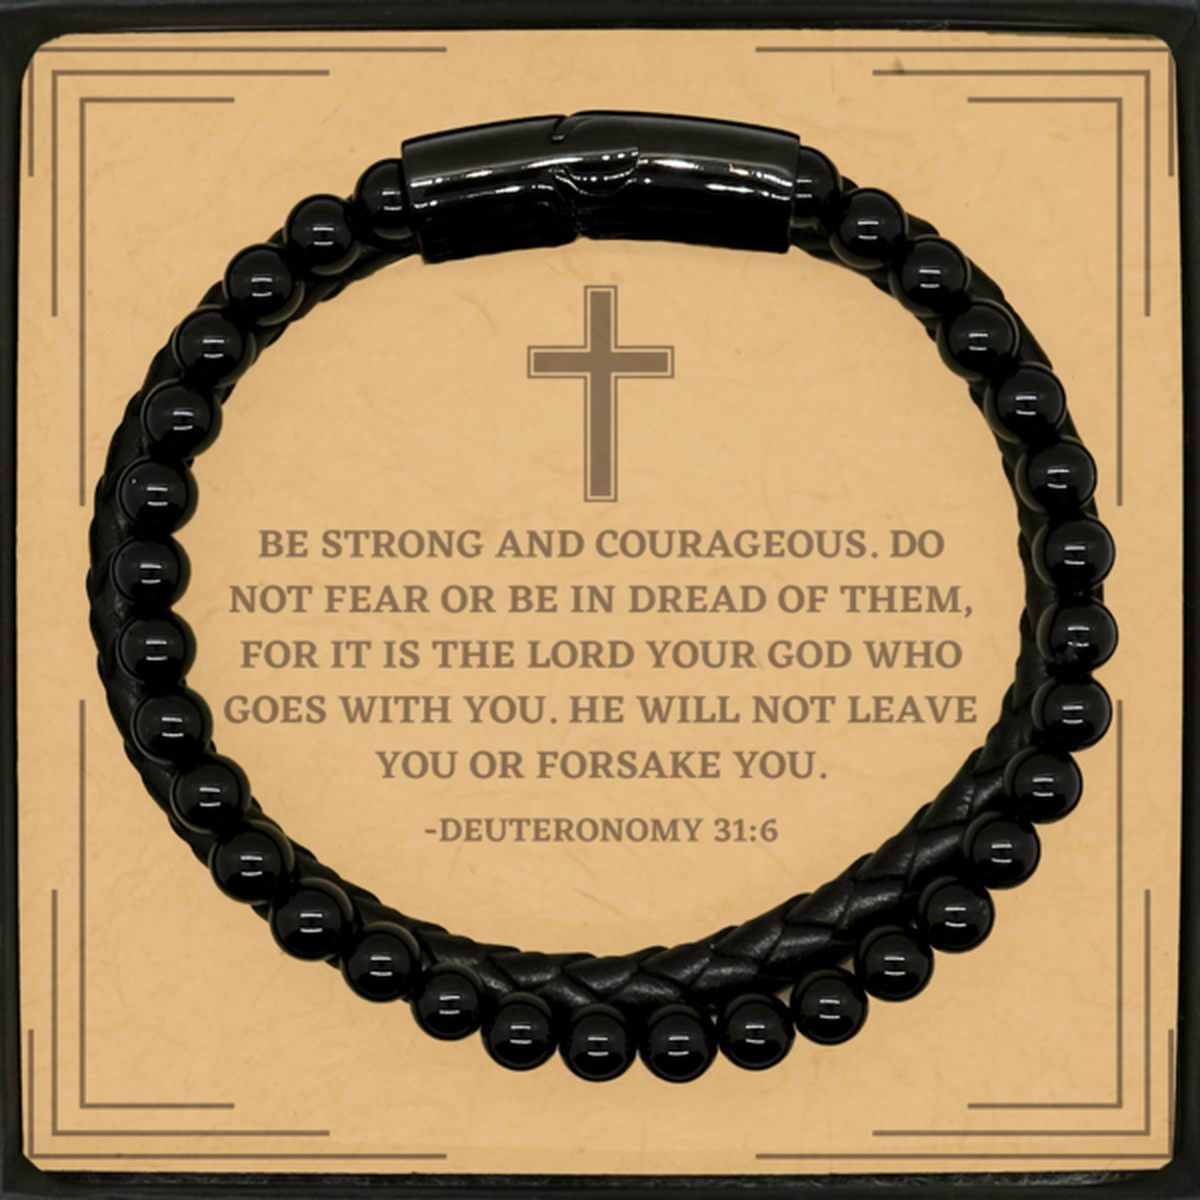 Baptism Gifts For Teenage Boys Girls, Christian Bible Verse Stone Leather Bracelet, Be strong and courageous, Confirmation Gifts, Bible Verse Card for Son, Godson, Grandson